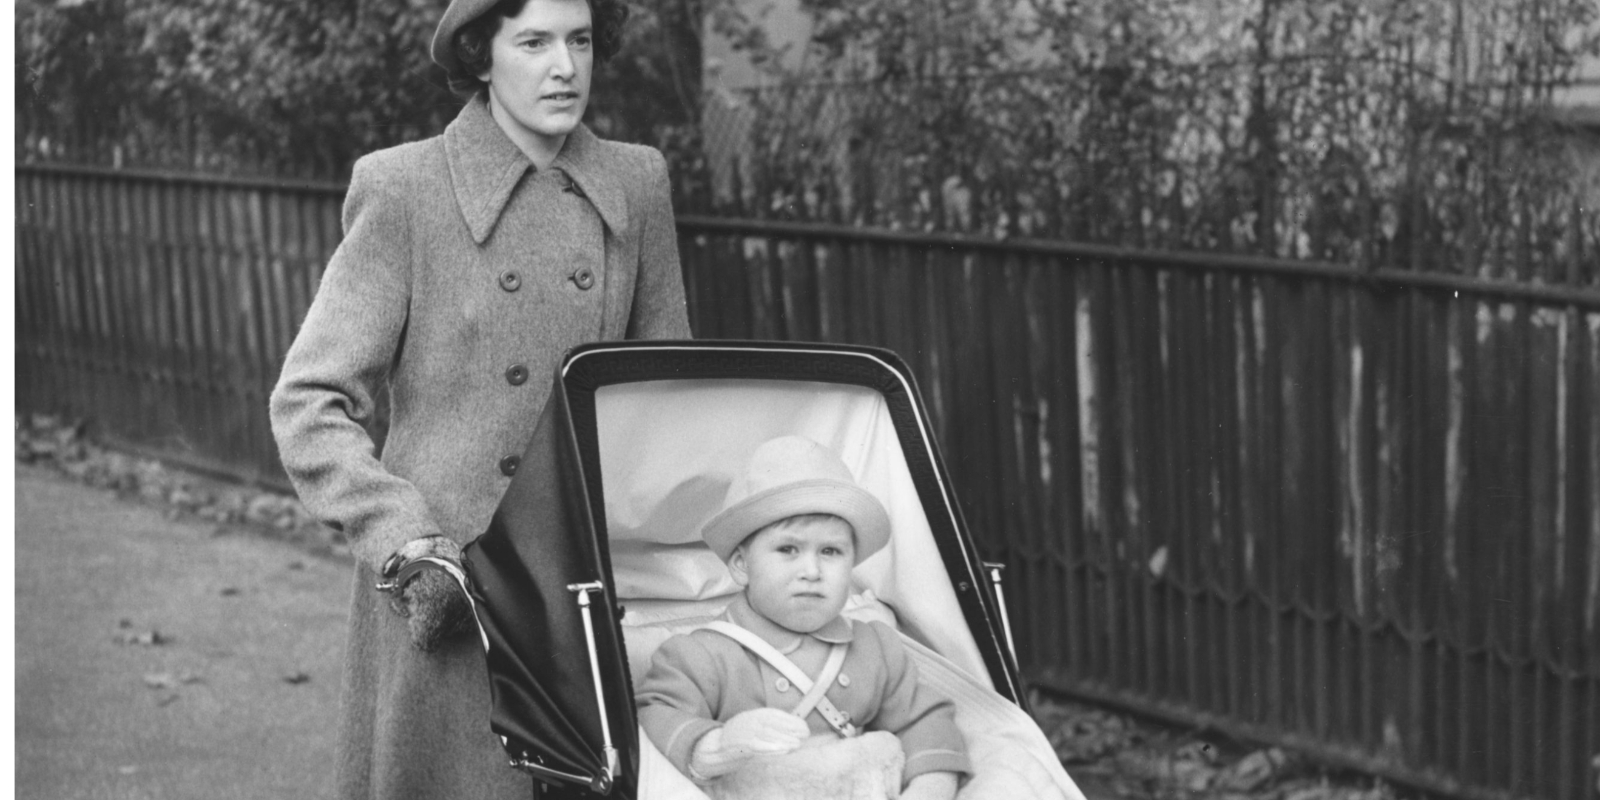 Then-Prince Charles being pushed in a stroller by his nanny Mabel Anderson.